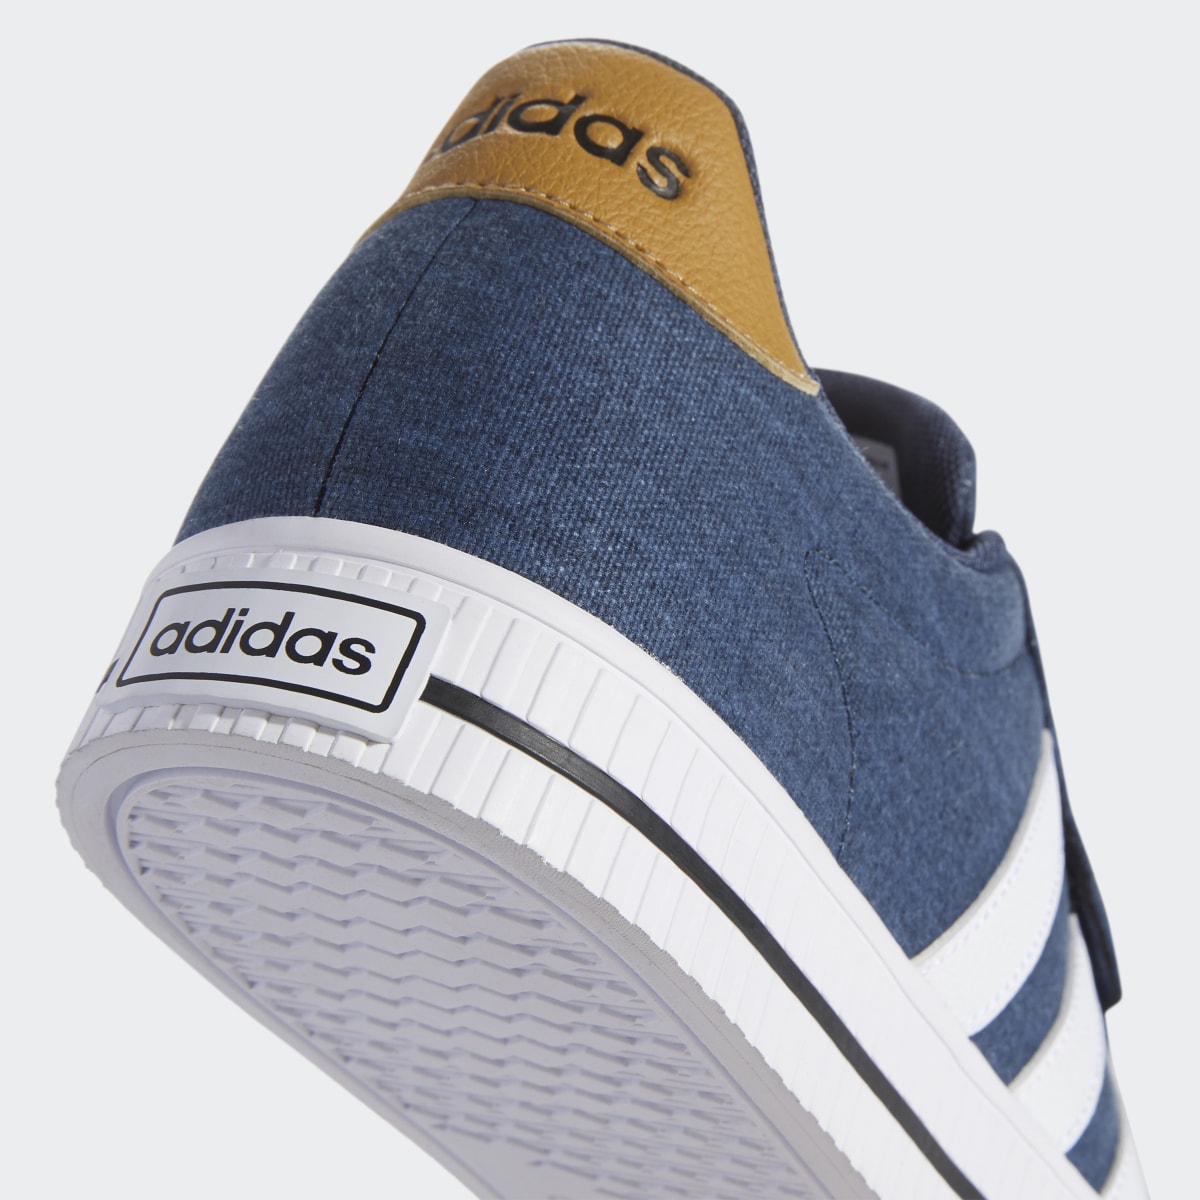 Adidas Daily 3.0 Shoes. 10